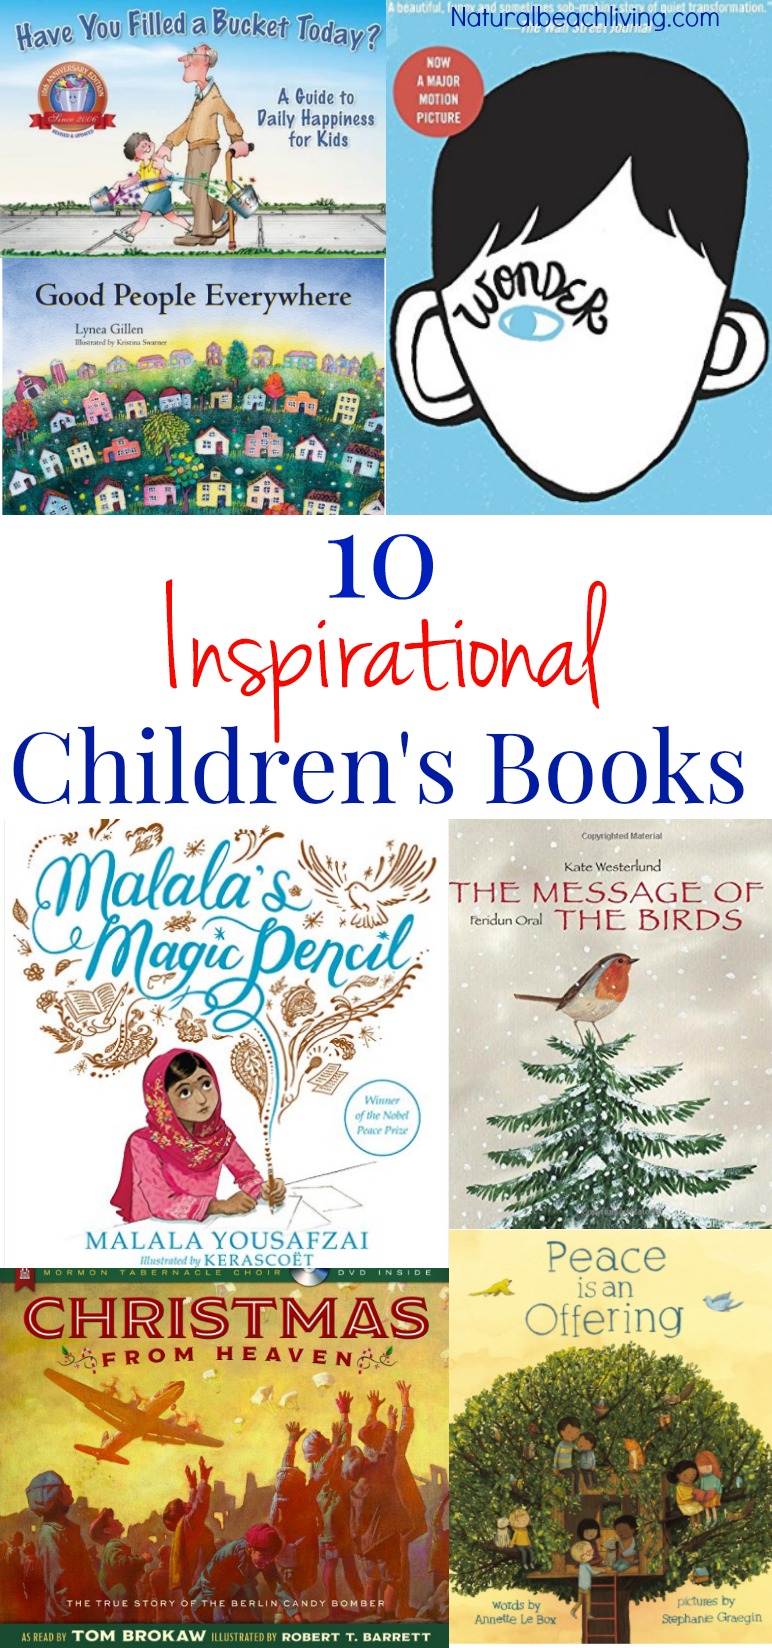 10+ Children’s Books That Will Inspire You During Holidays